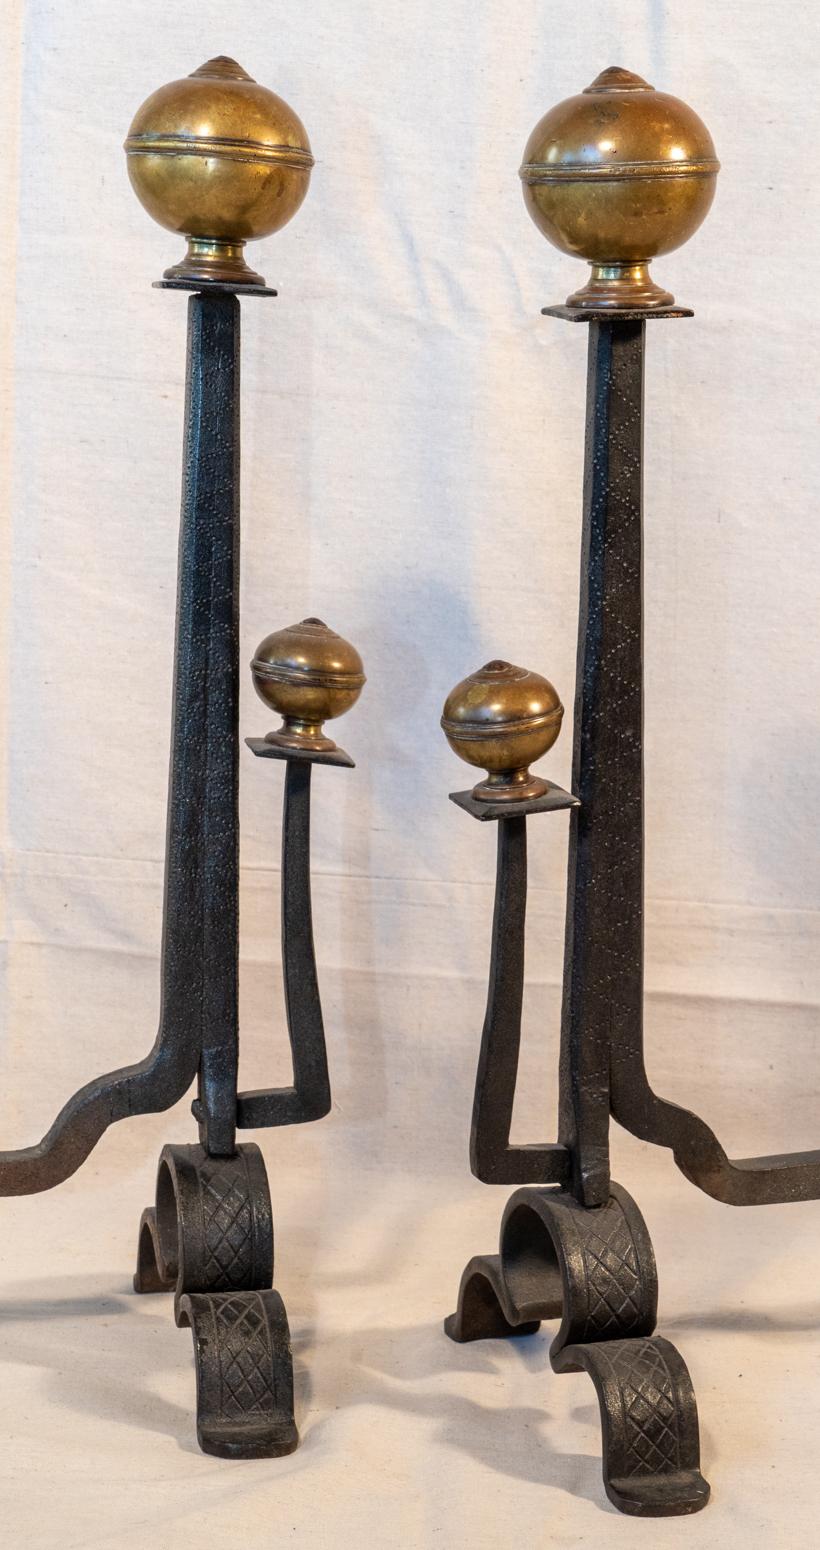 Pair of 17th century style iron and brass handwrought Andirons, circa 1880
The later manufacture, all by hand, in the early Arts & Crafts period.
All handwrought of continuous form on the bases and uprights from a single worked piece. Cast brass